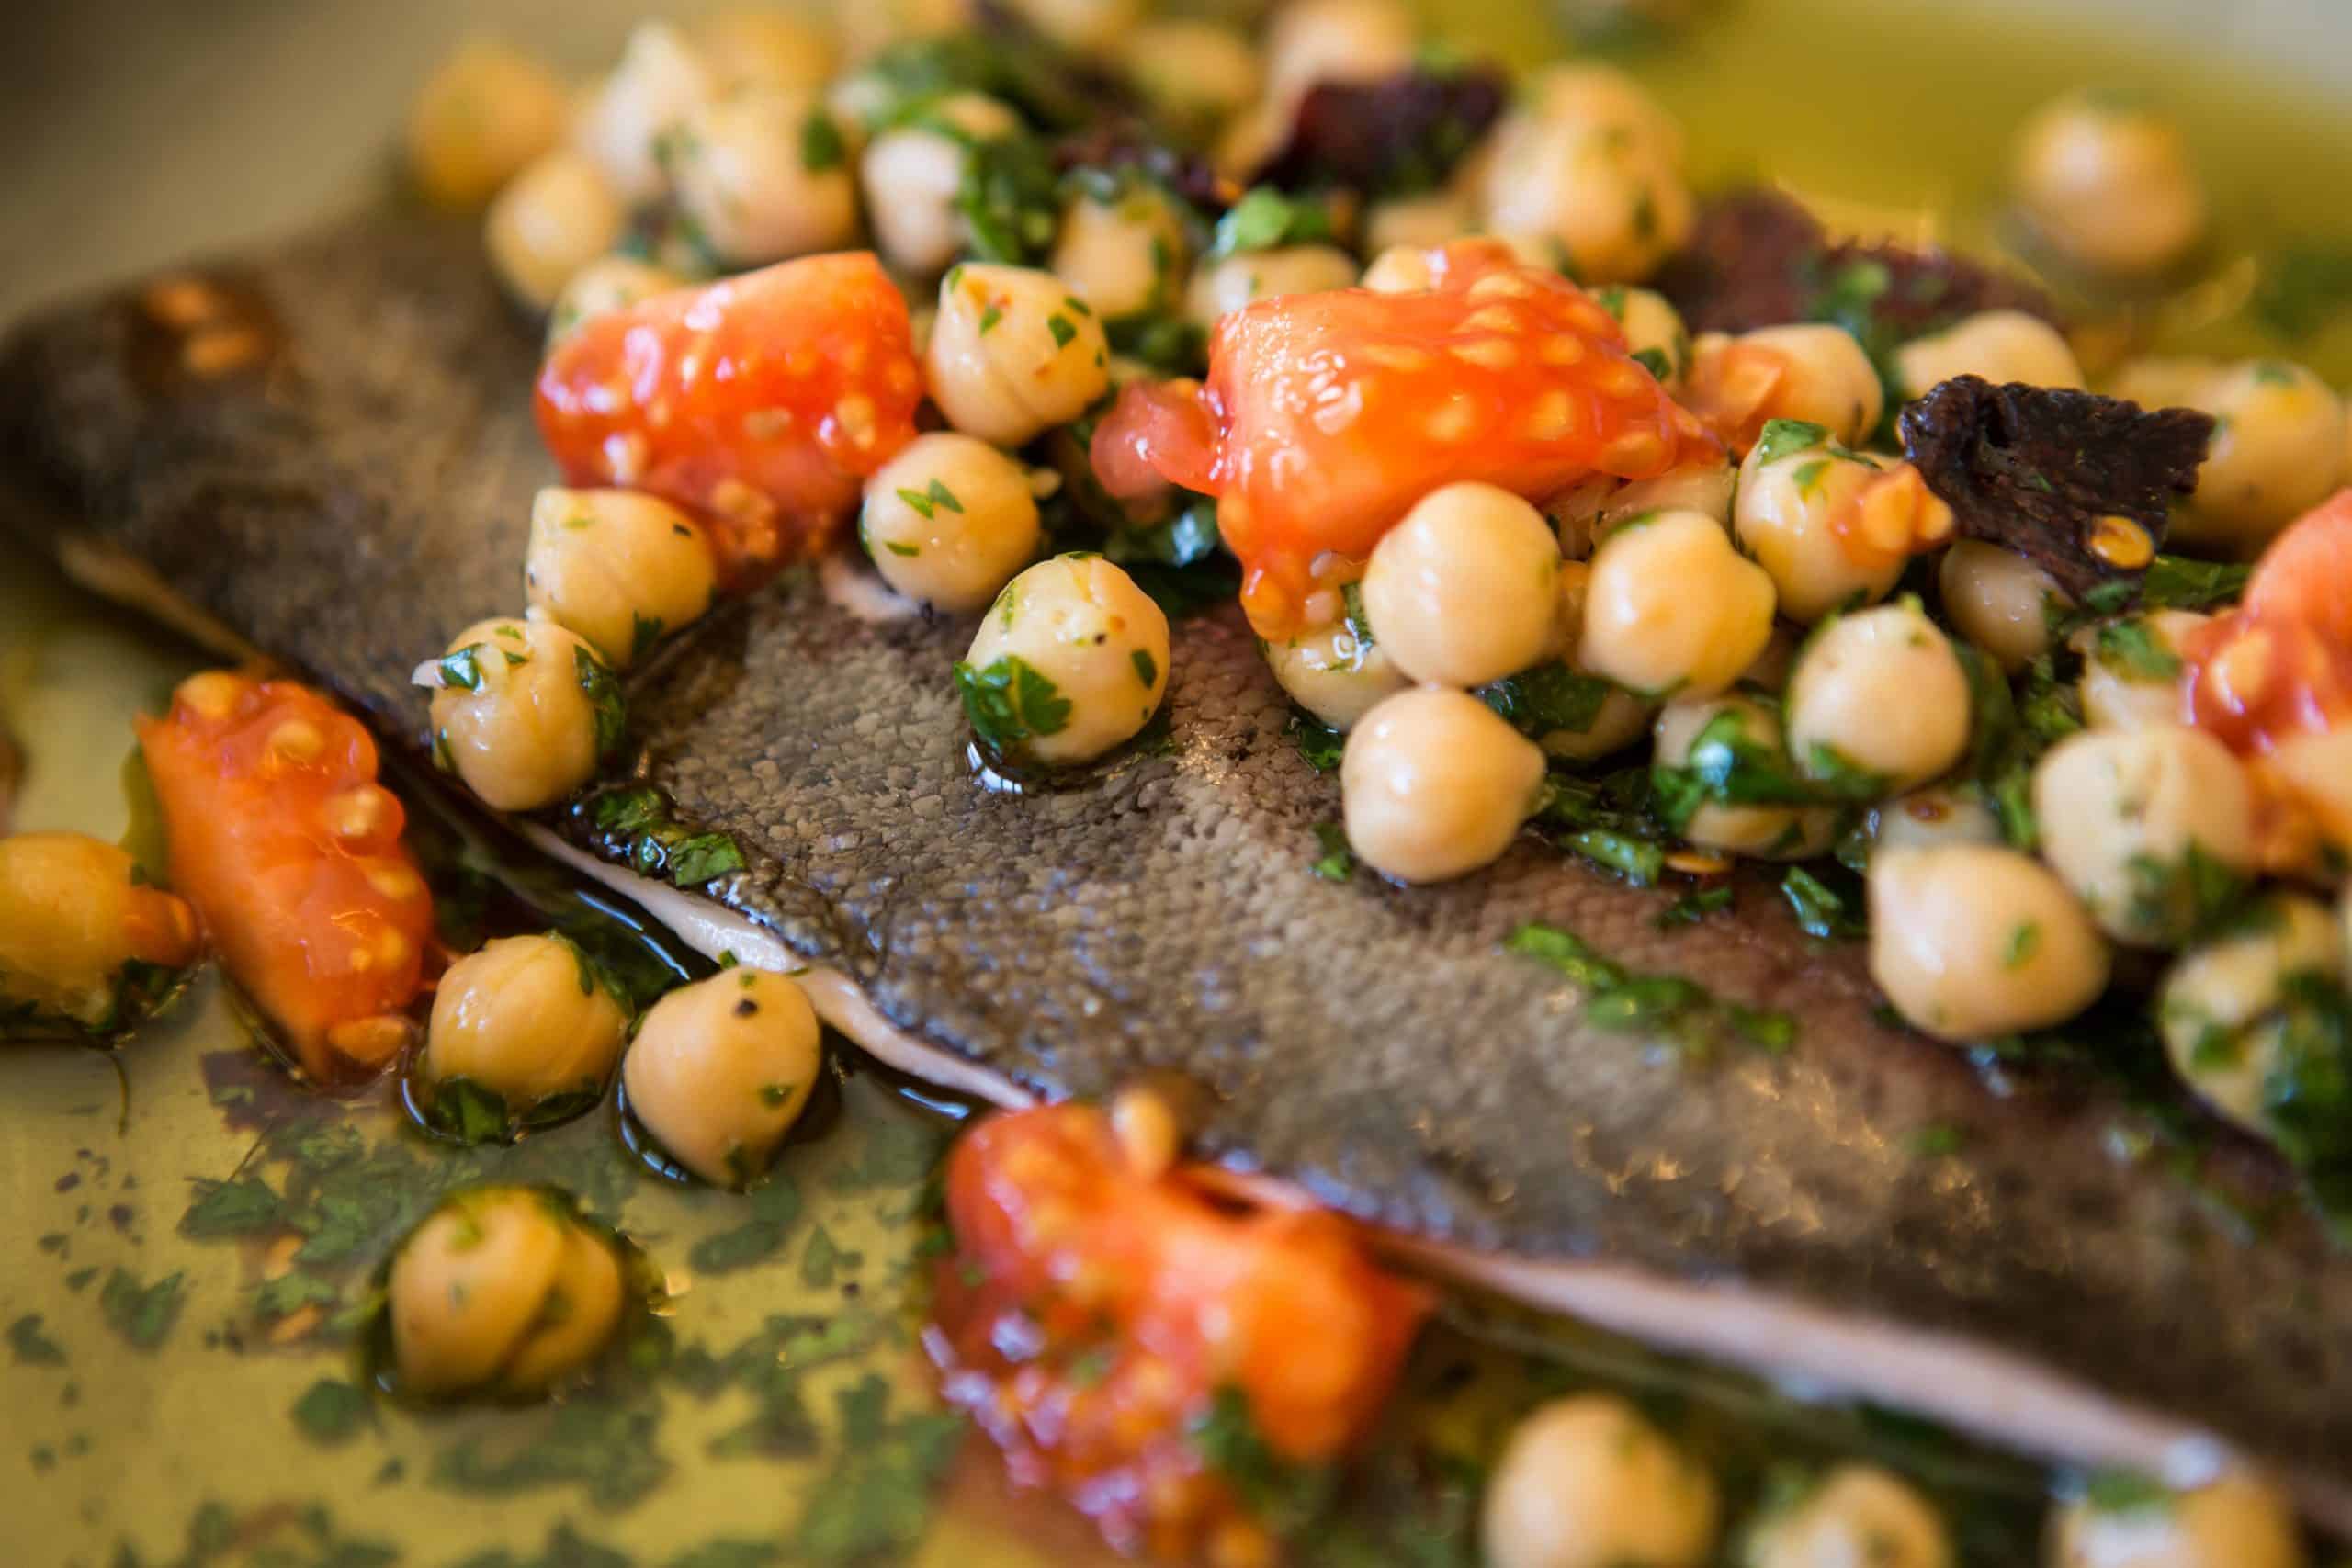 Rainbow trout with herbs and organic garbanzo beans